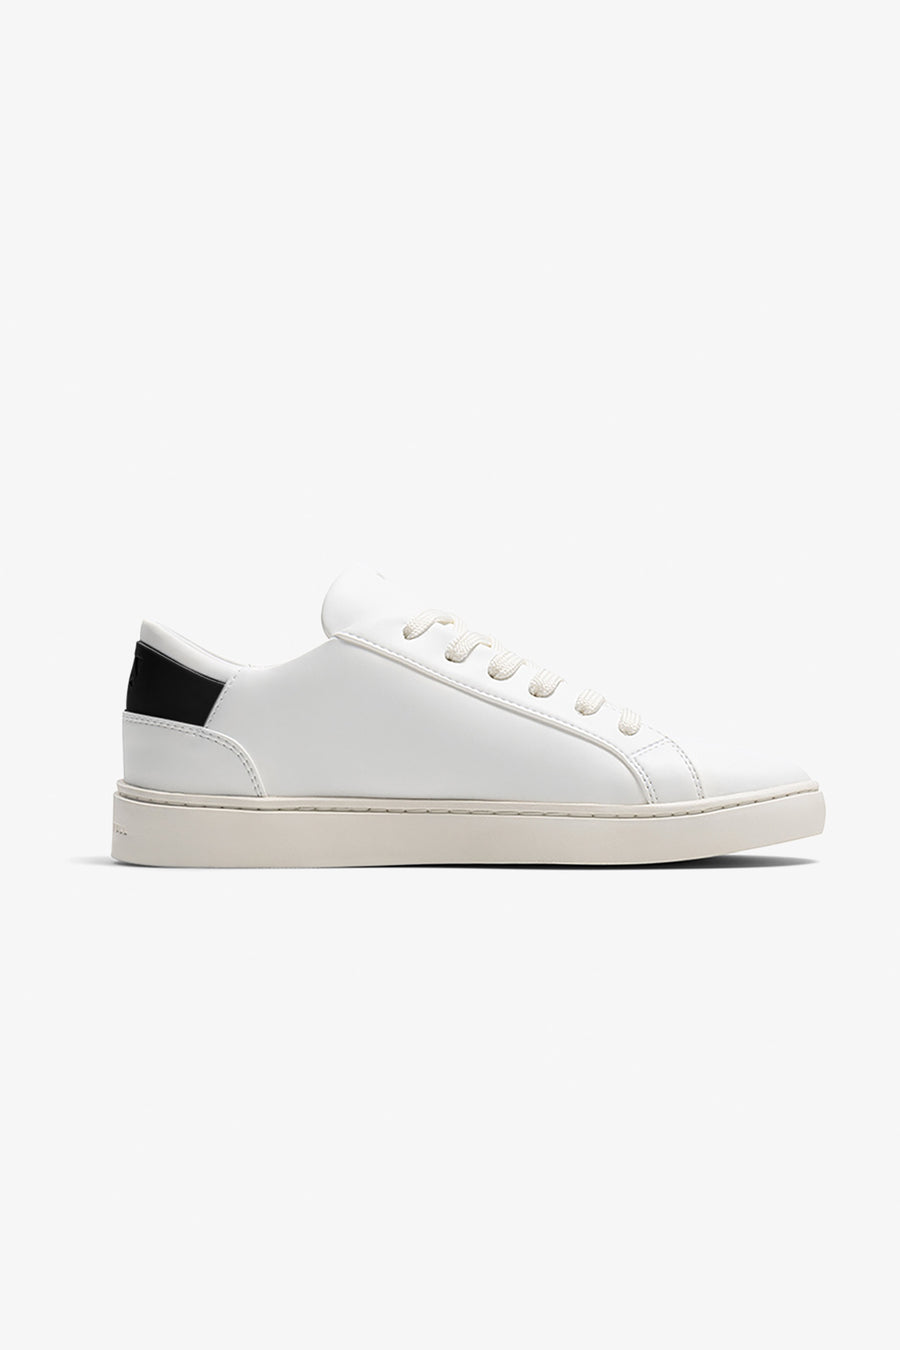 Thousand Fell Lace Up Sneaker - White and Black